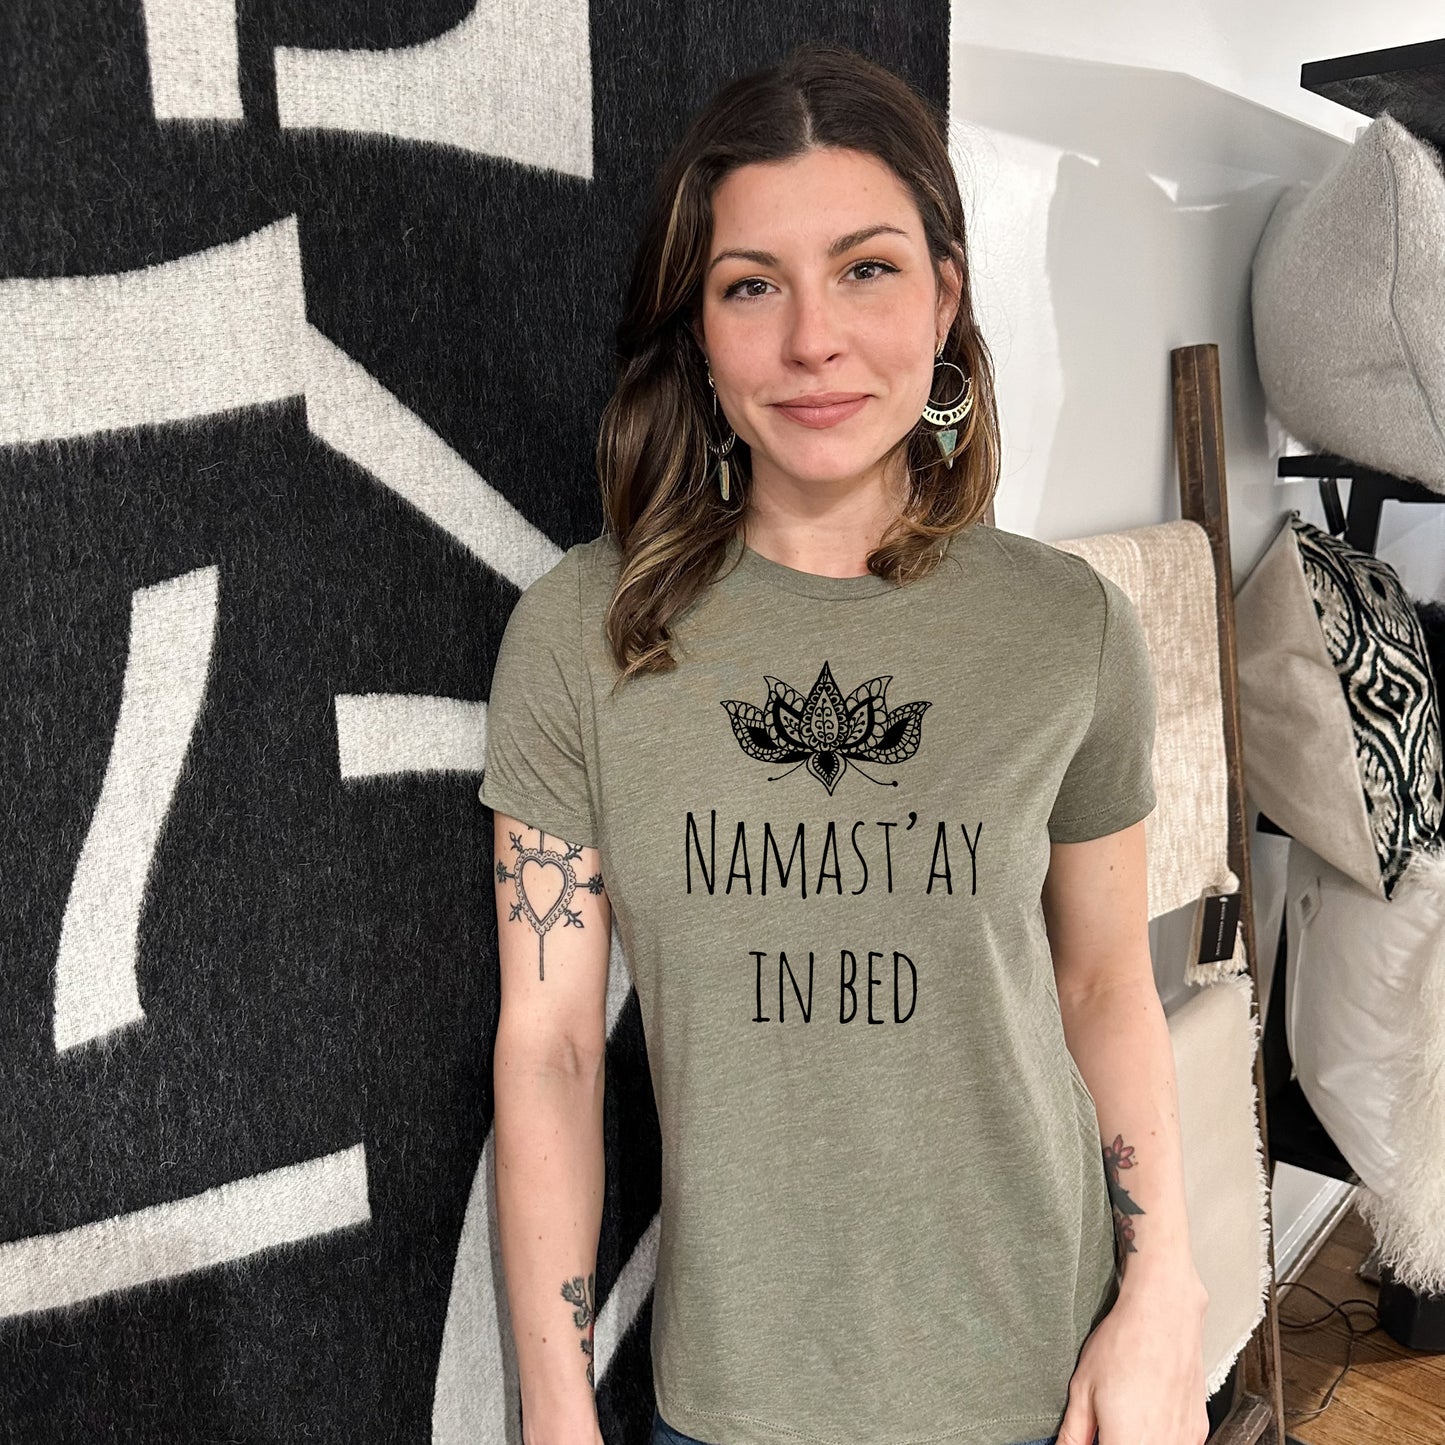 Namast'ay In Bed - Women's Crew Tee - Olive or Dusty Blue